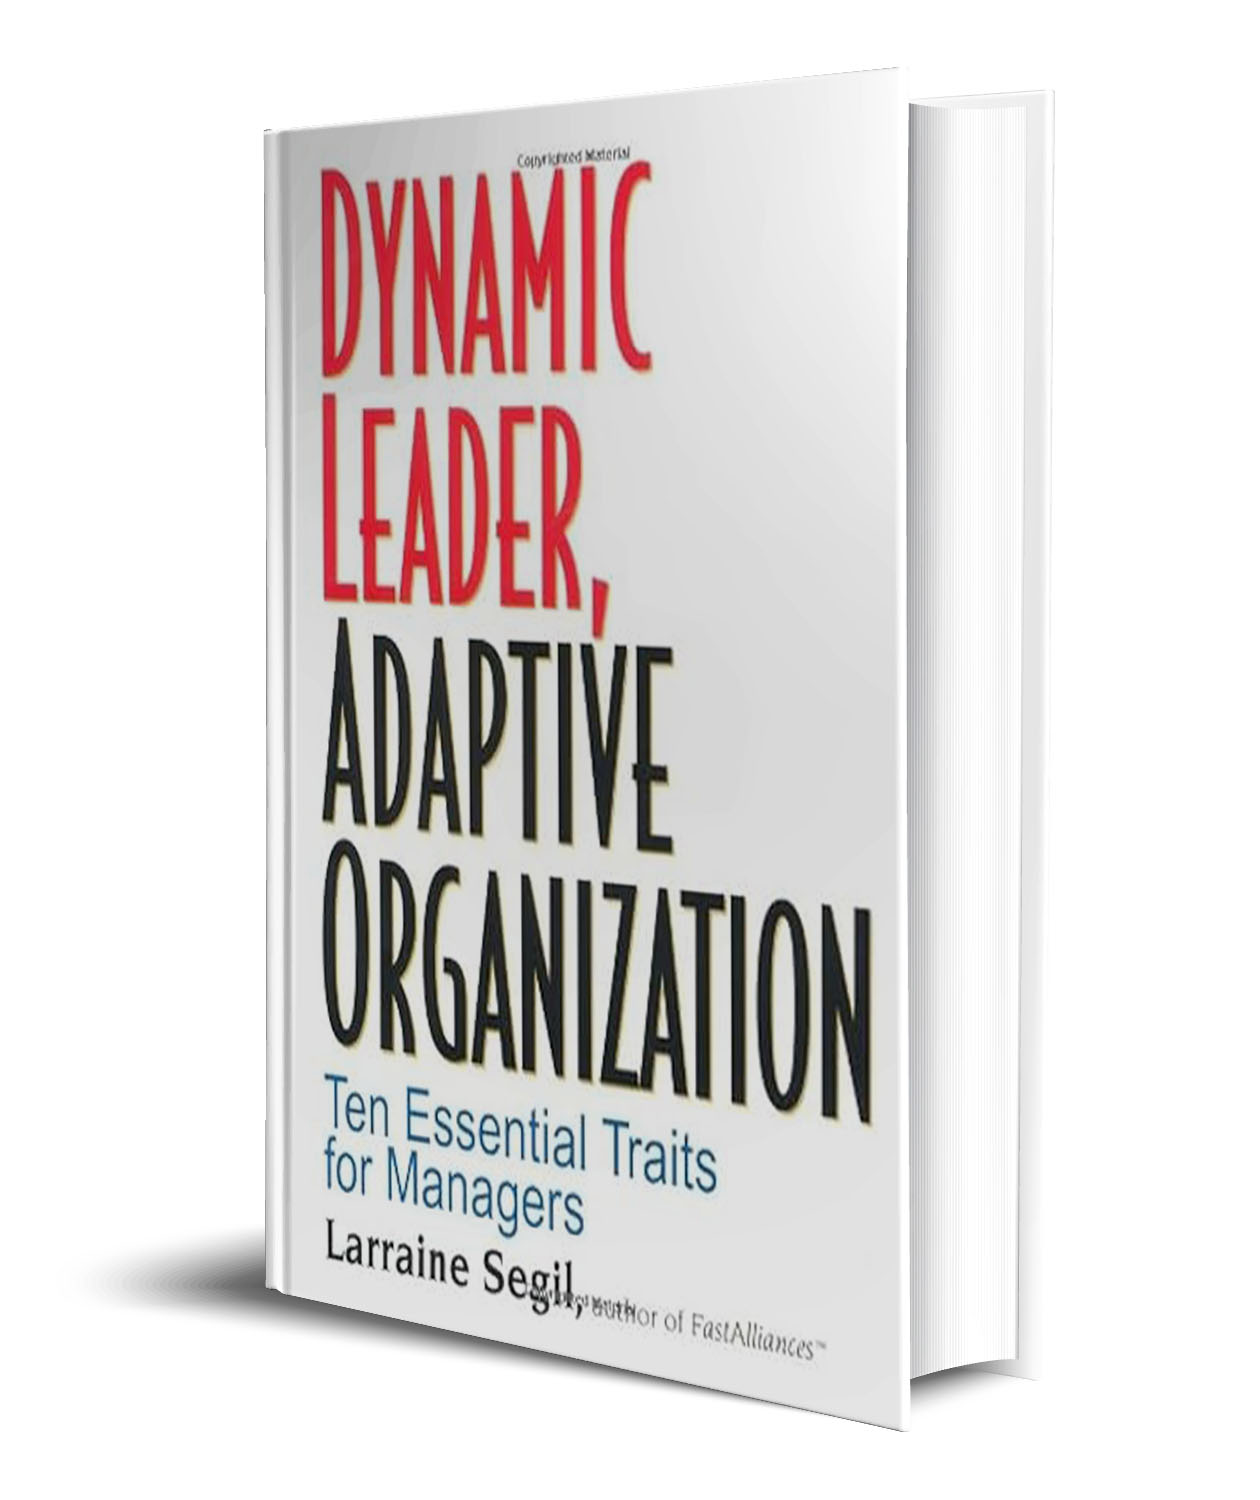 Dynamic Leader Adaptive Organization: Ten Essential Traits for Managers